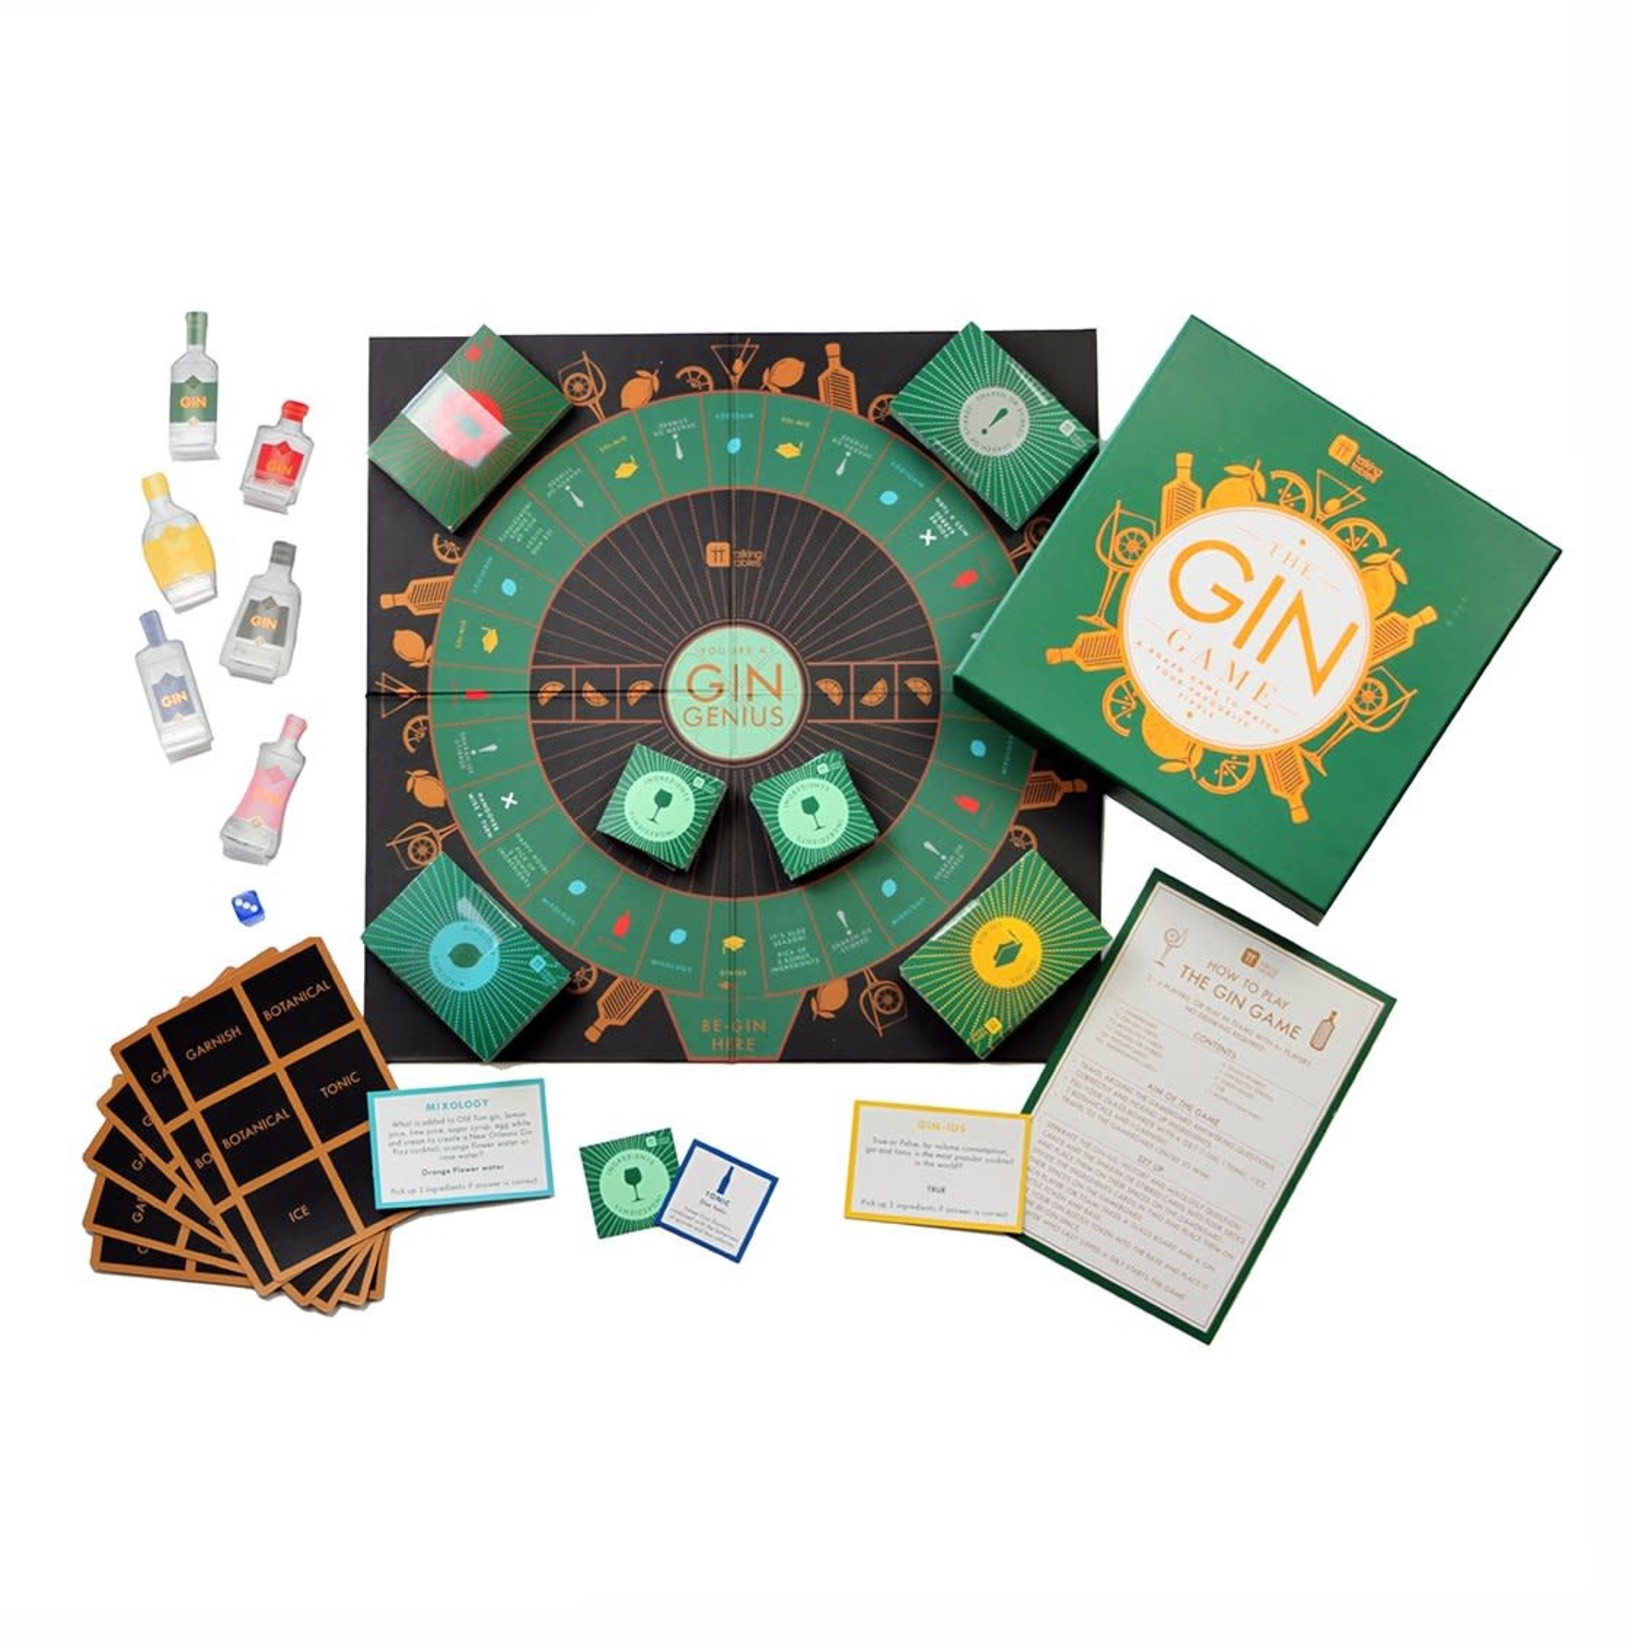 Creative Twist Events Gin Themed Board Game